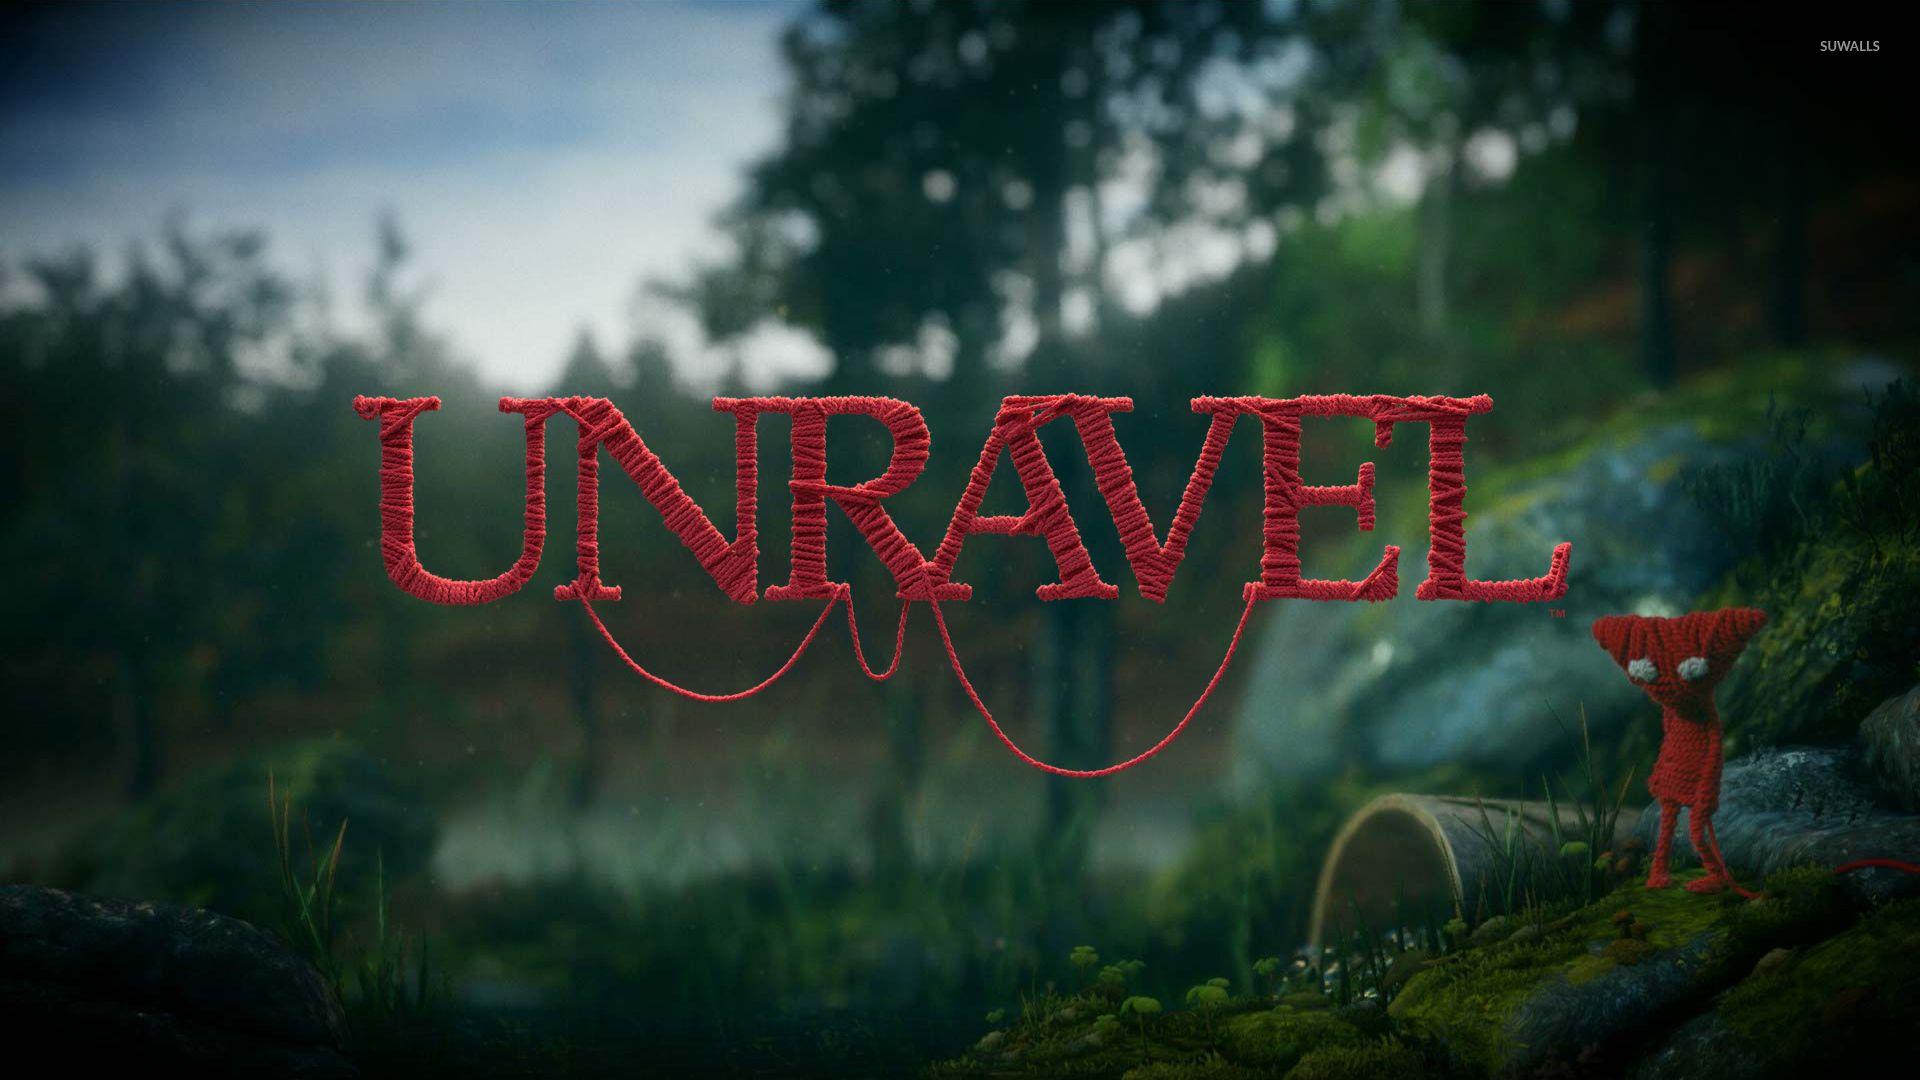 HD wallpaper: Video Game, Unravel Two